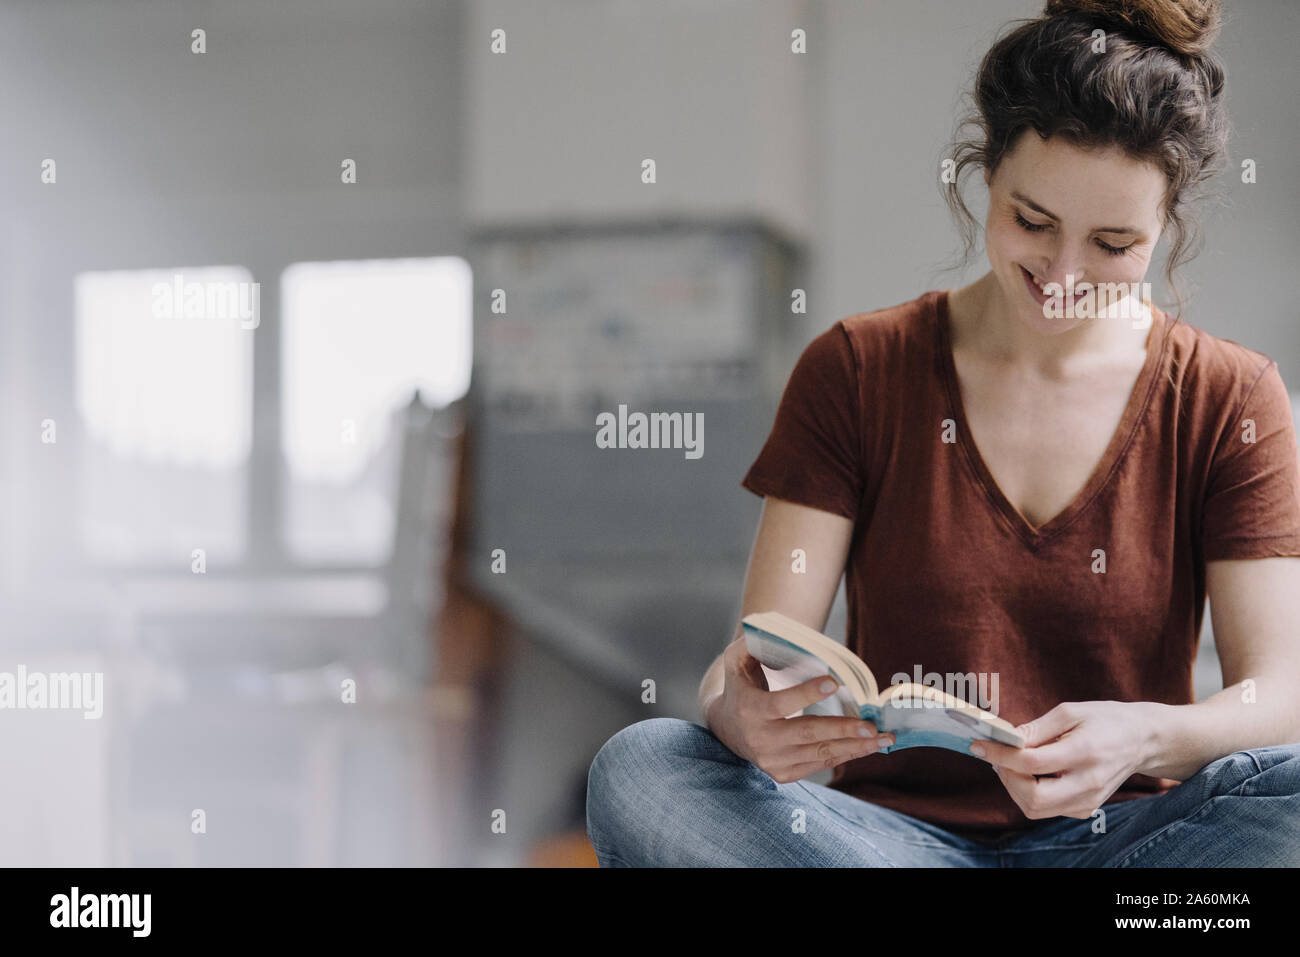 Smiling young woman reading a book Stock Photo